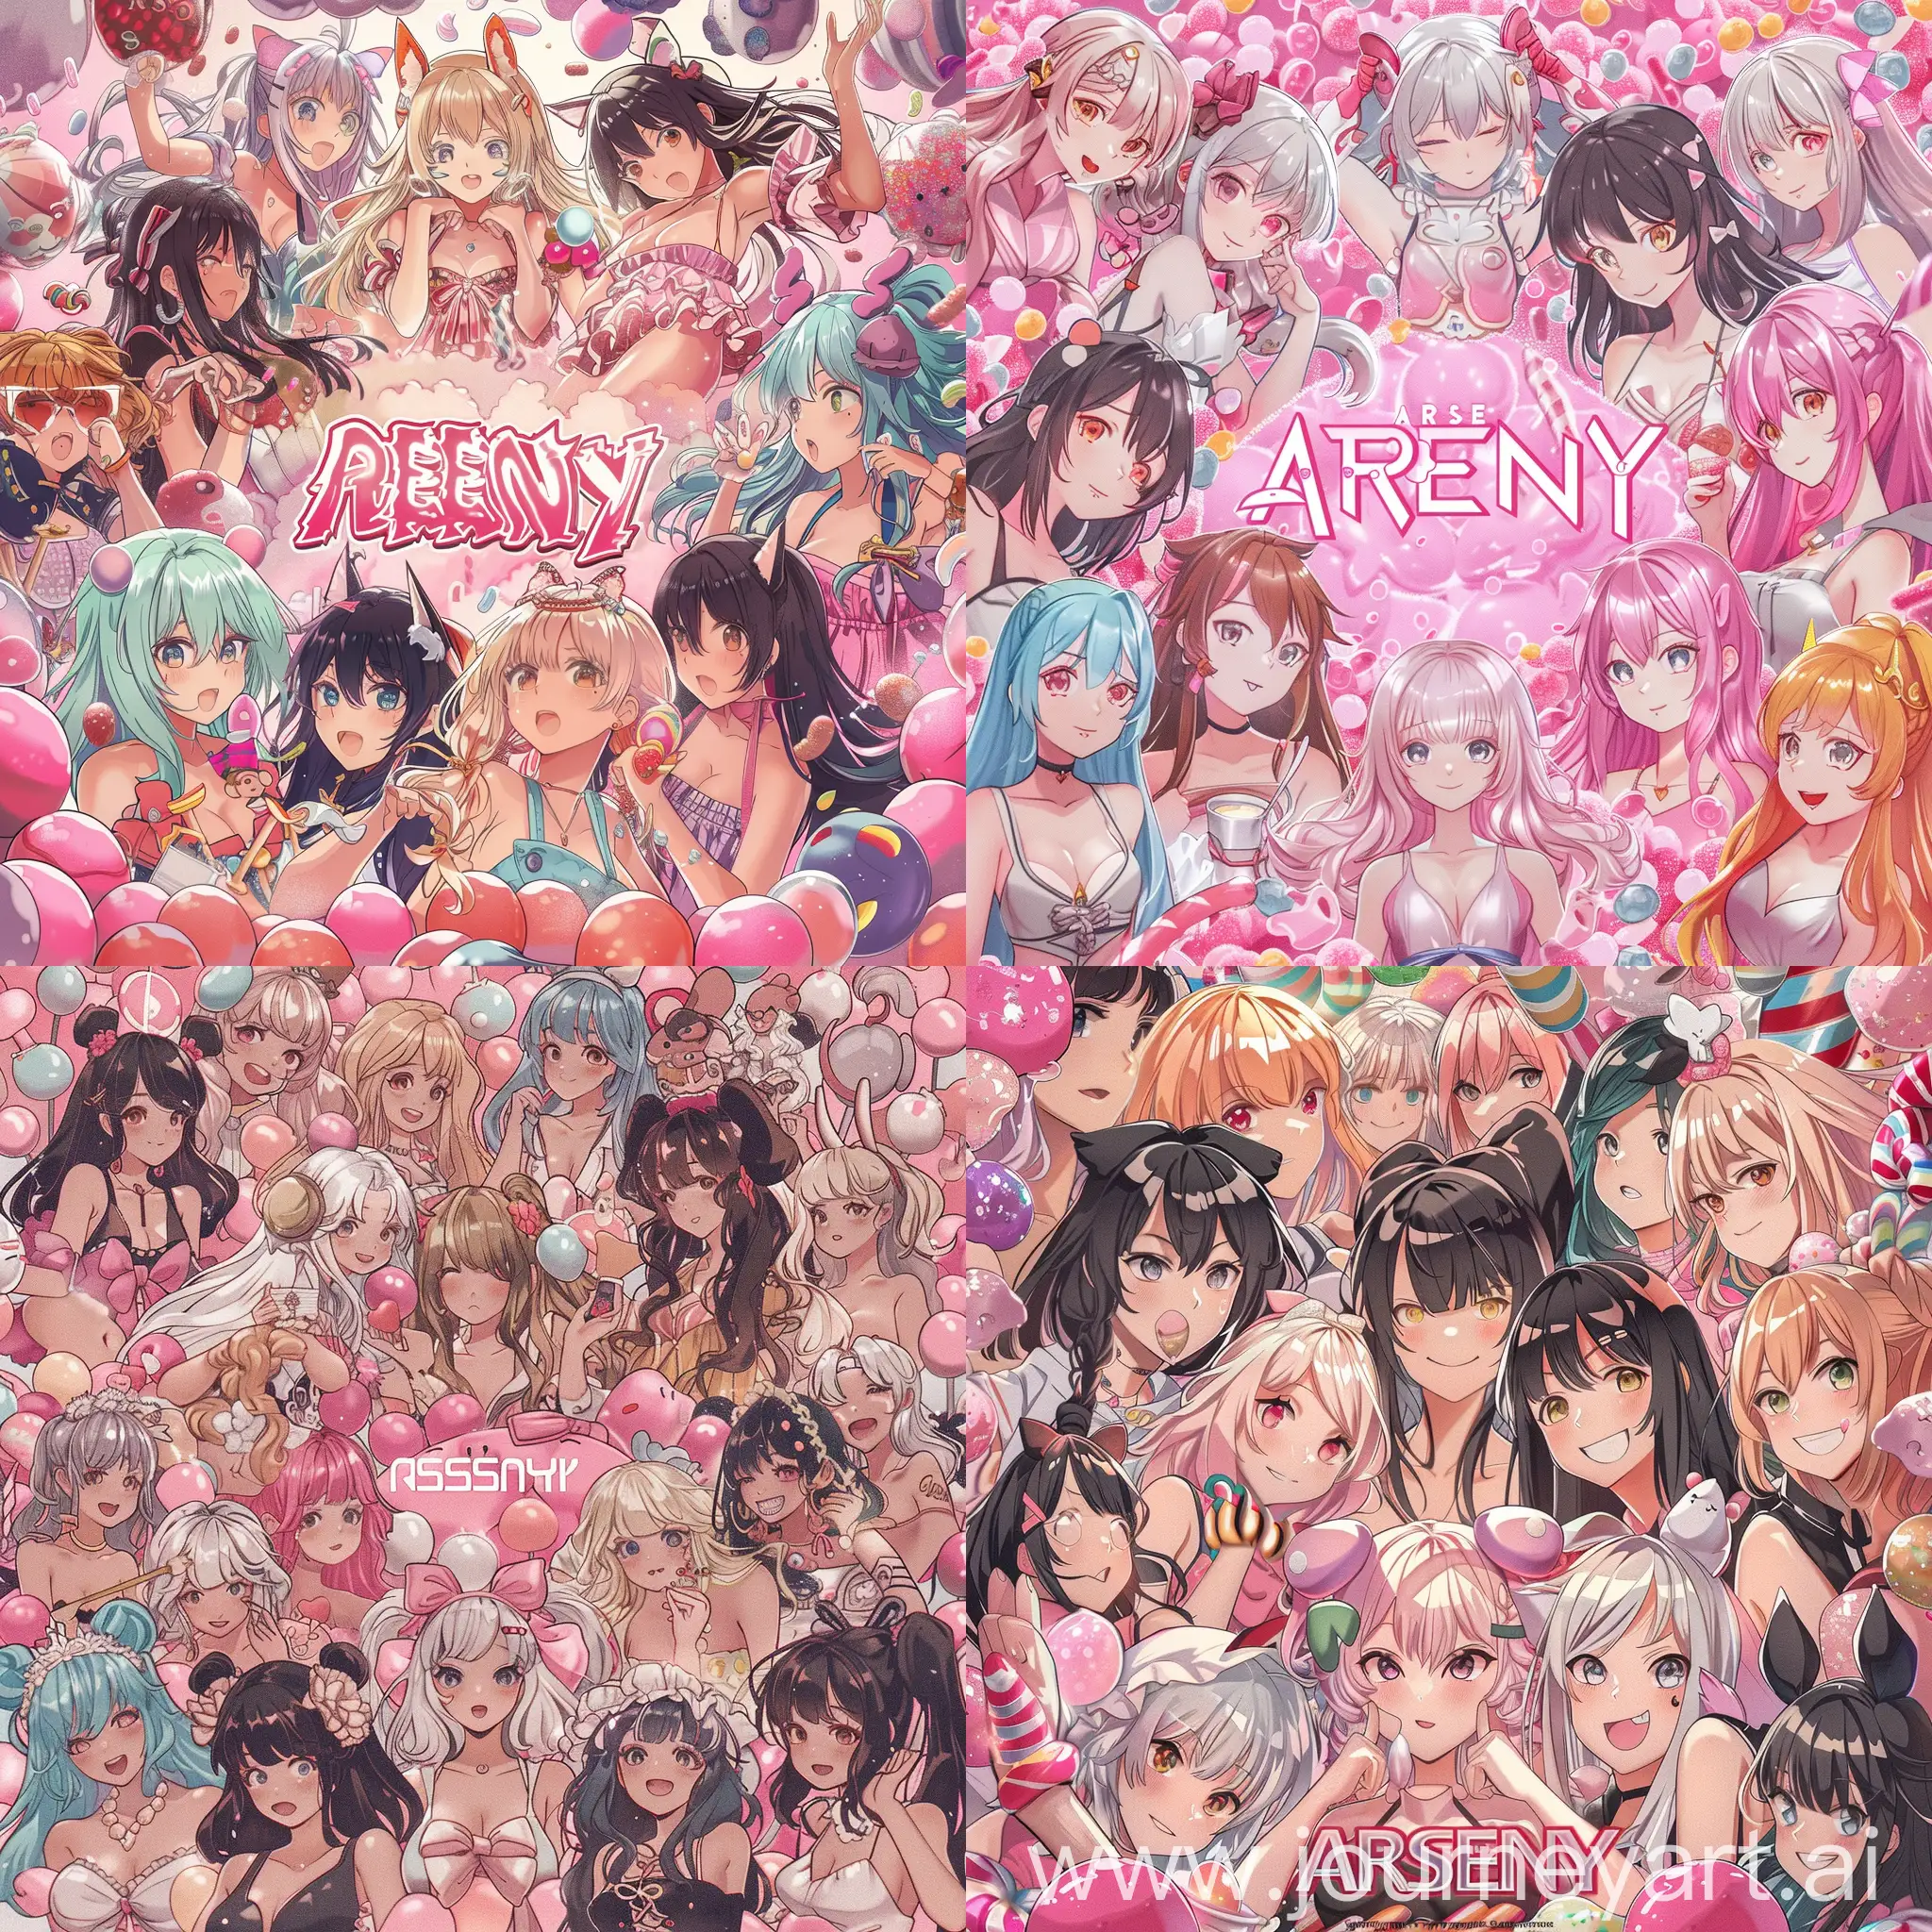 Charming-Anime-Girls-in-Pink-Candy-Wonderland-Poster